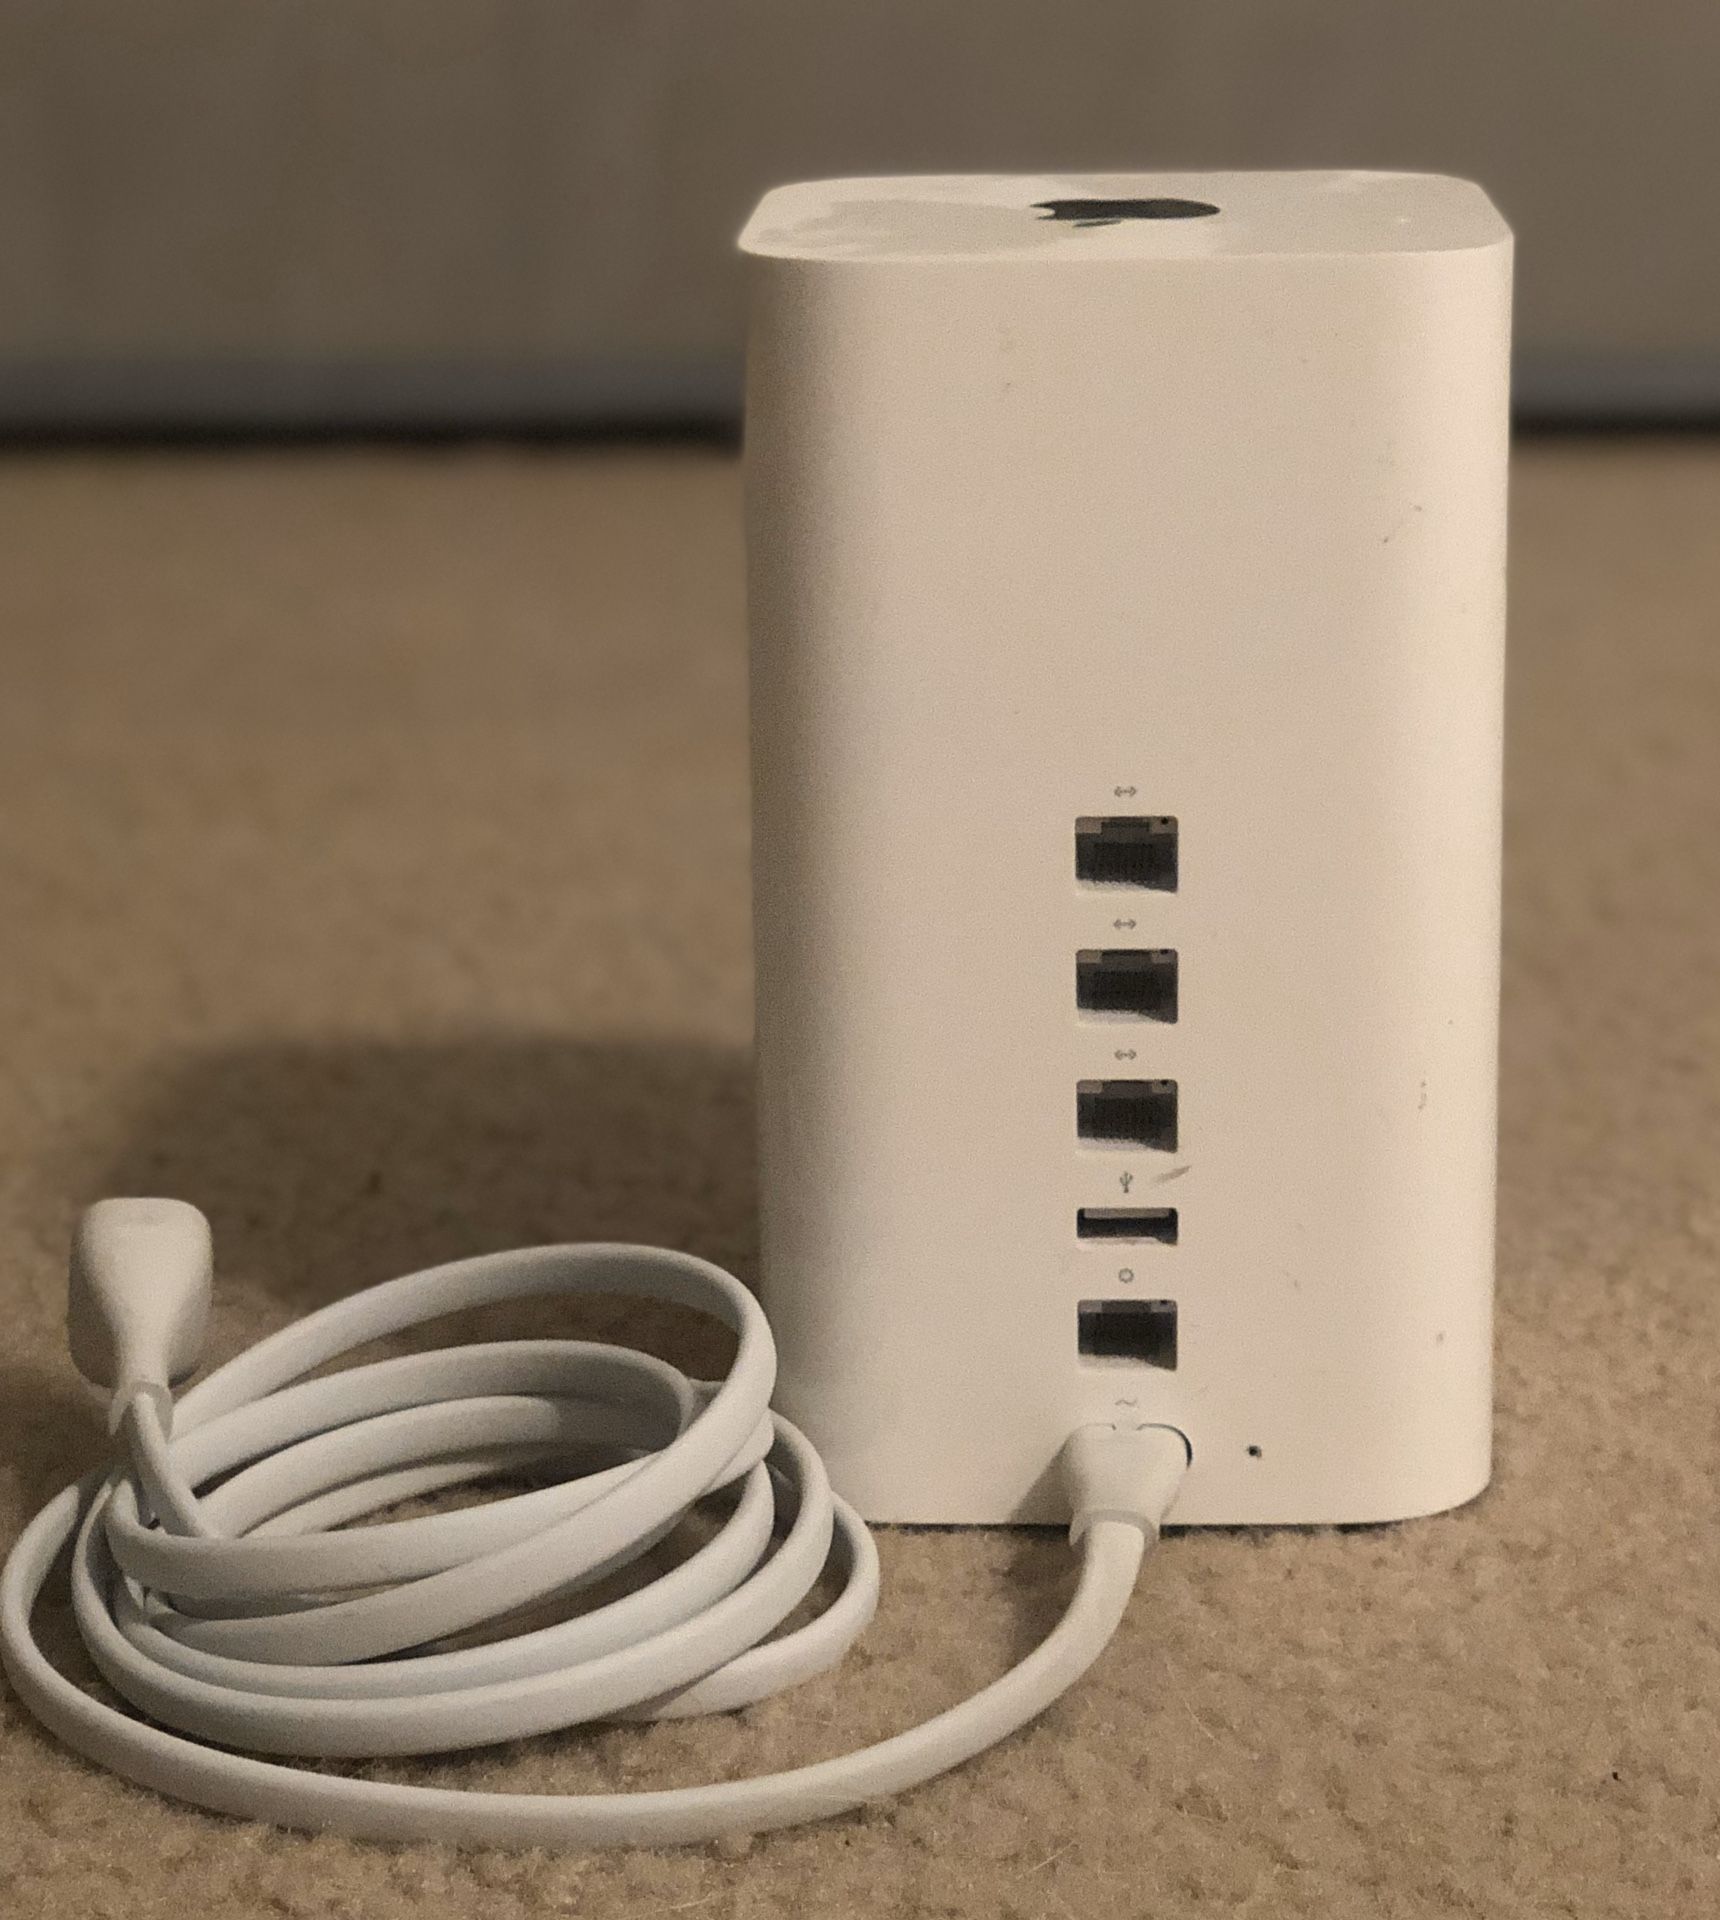 AirPort Extreme (last one released) 802.11AC Model: (A1521) router